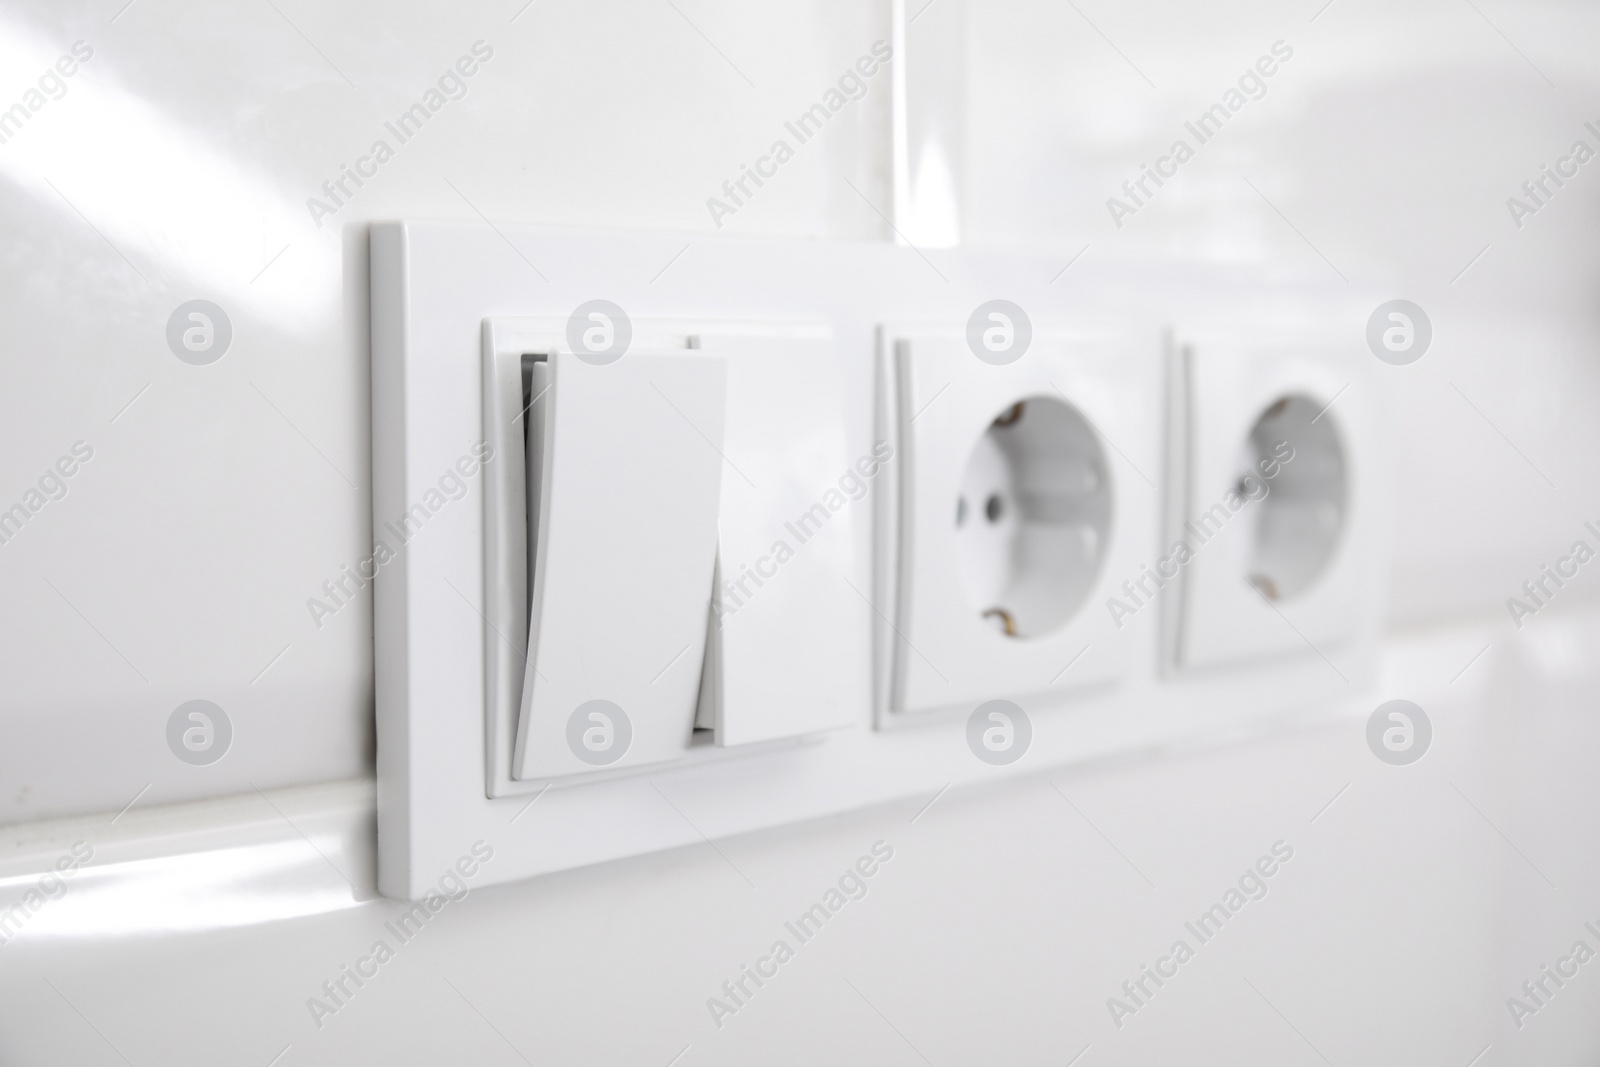 Photo of Light switch and power sockets on white wall indoors, closeup